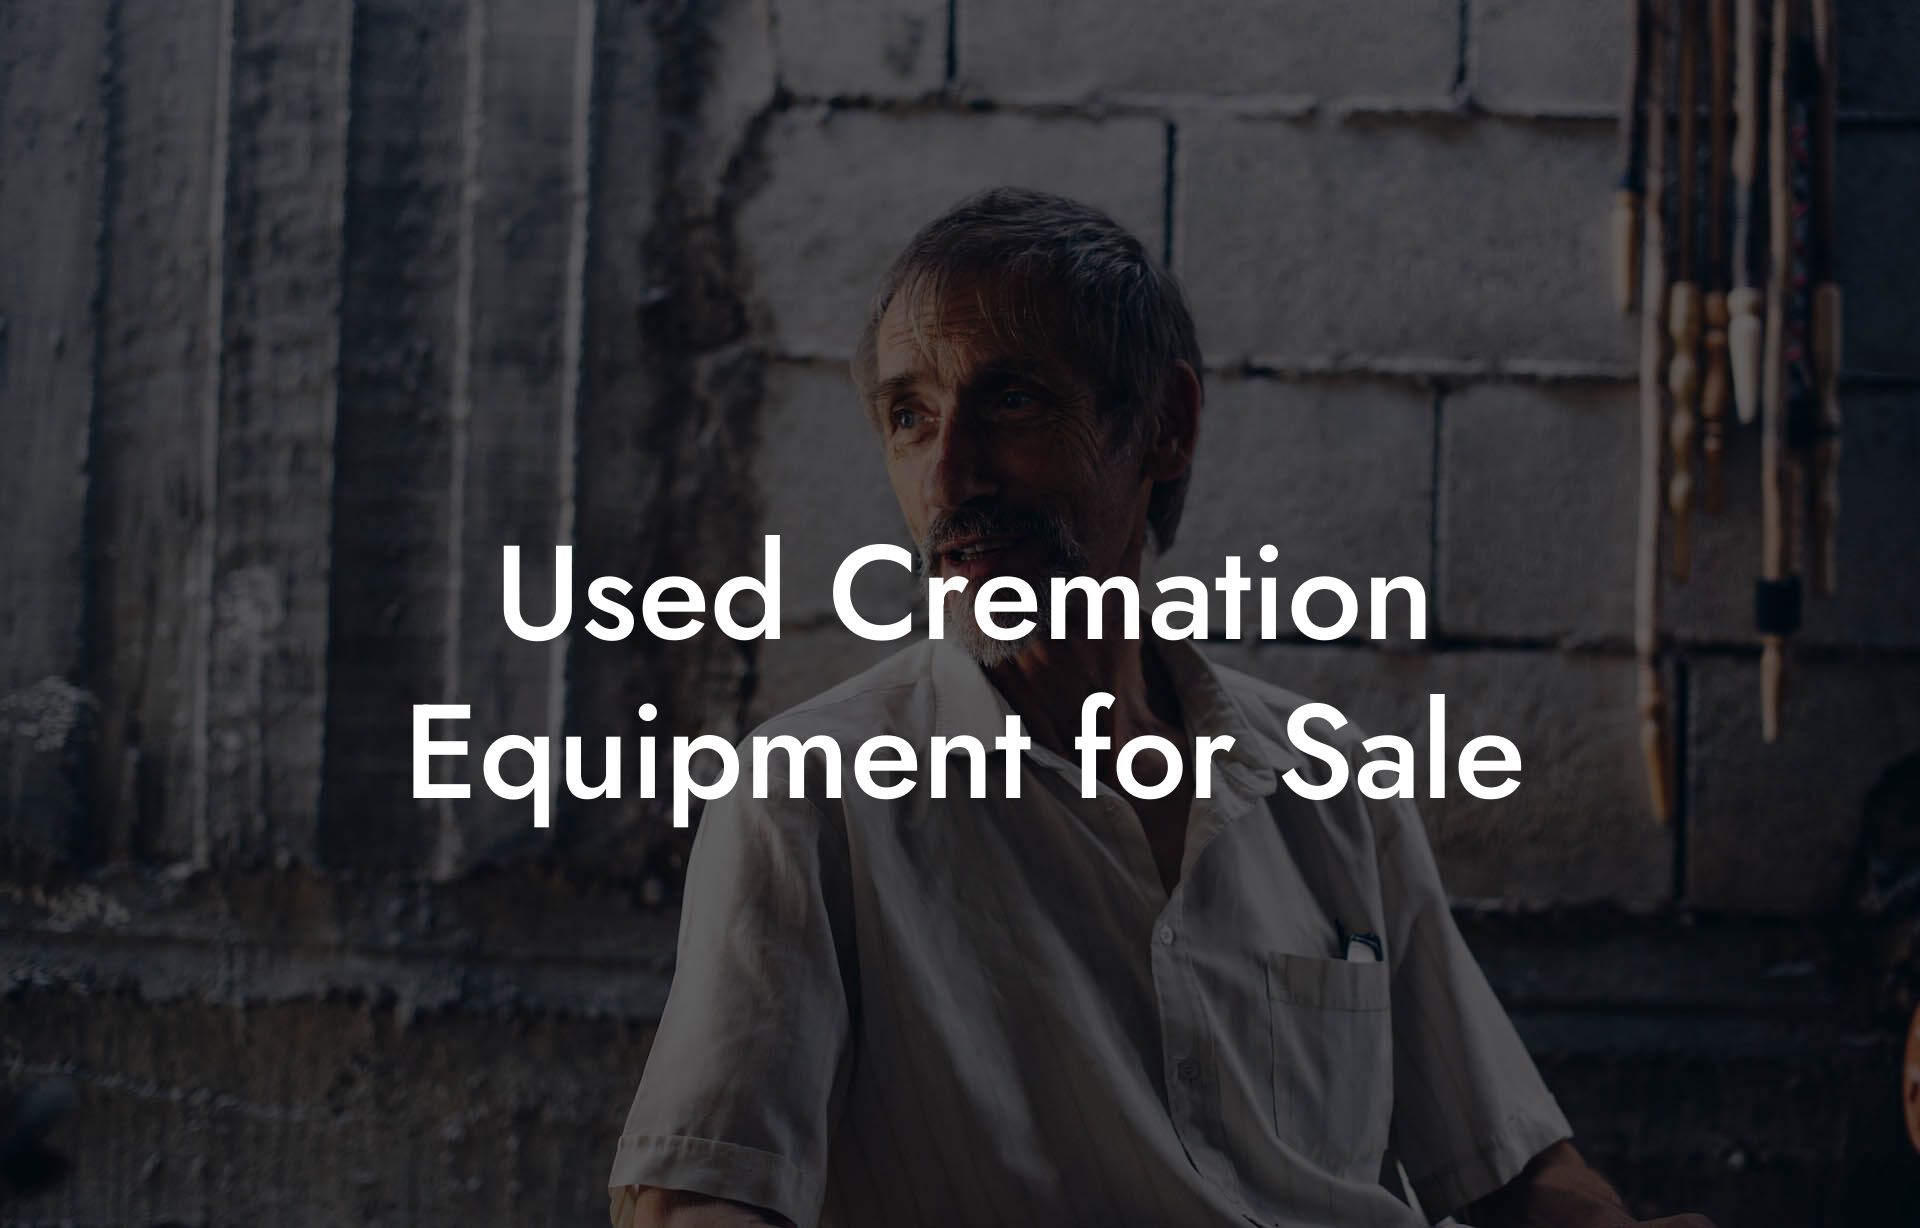 Used Cremation Equipment for Sale